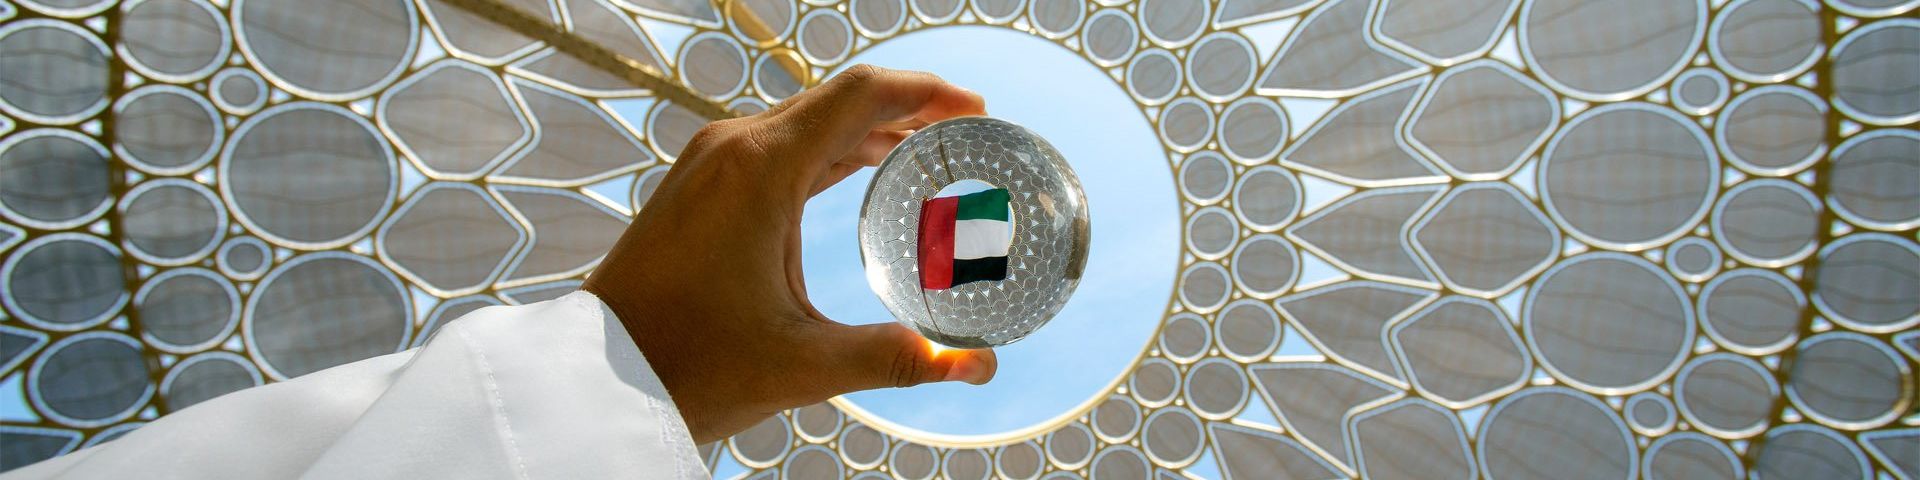 A white sleeved arm holds a glass ball against the sky light through a circular hole in a white ceiling of geometric design. In the centre of the glass ball, the flag of the UAE can be seen.